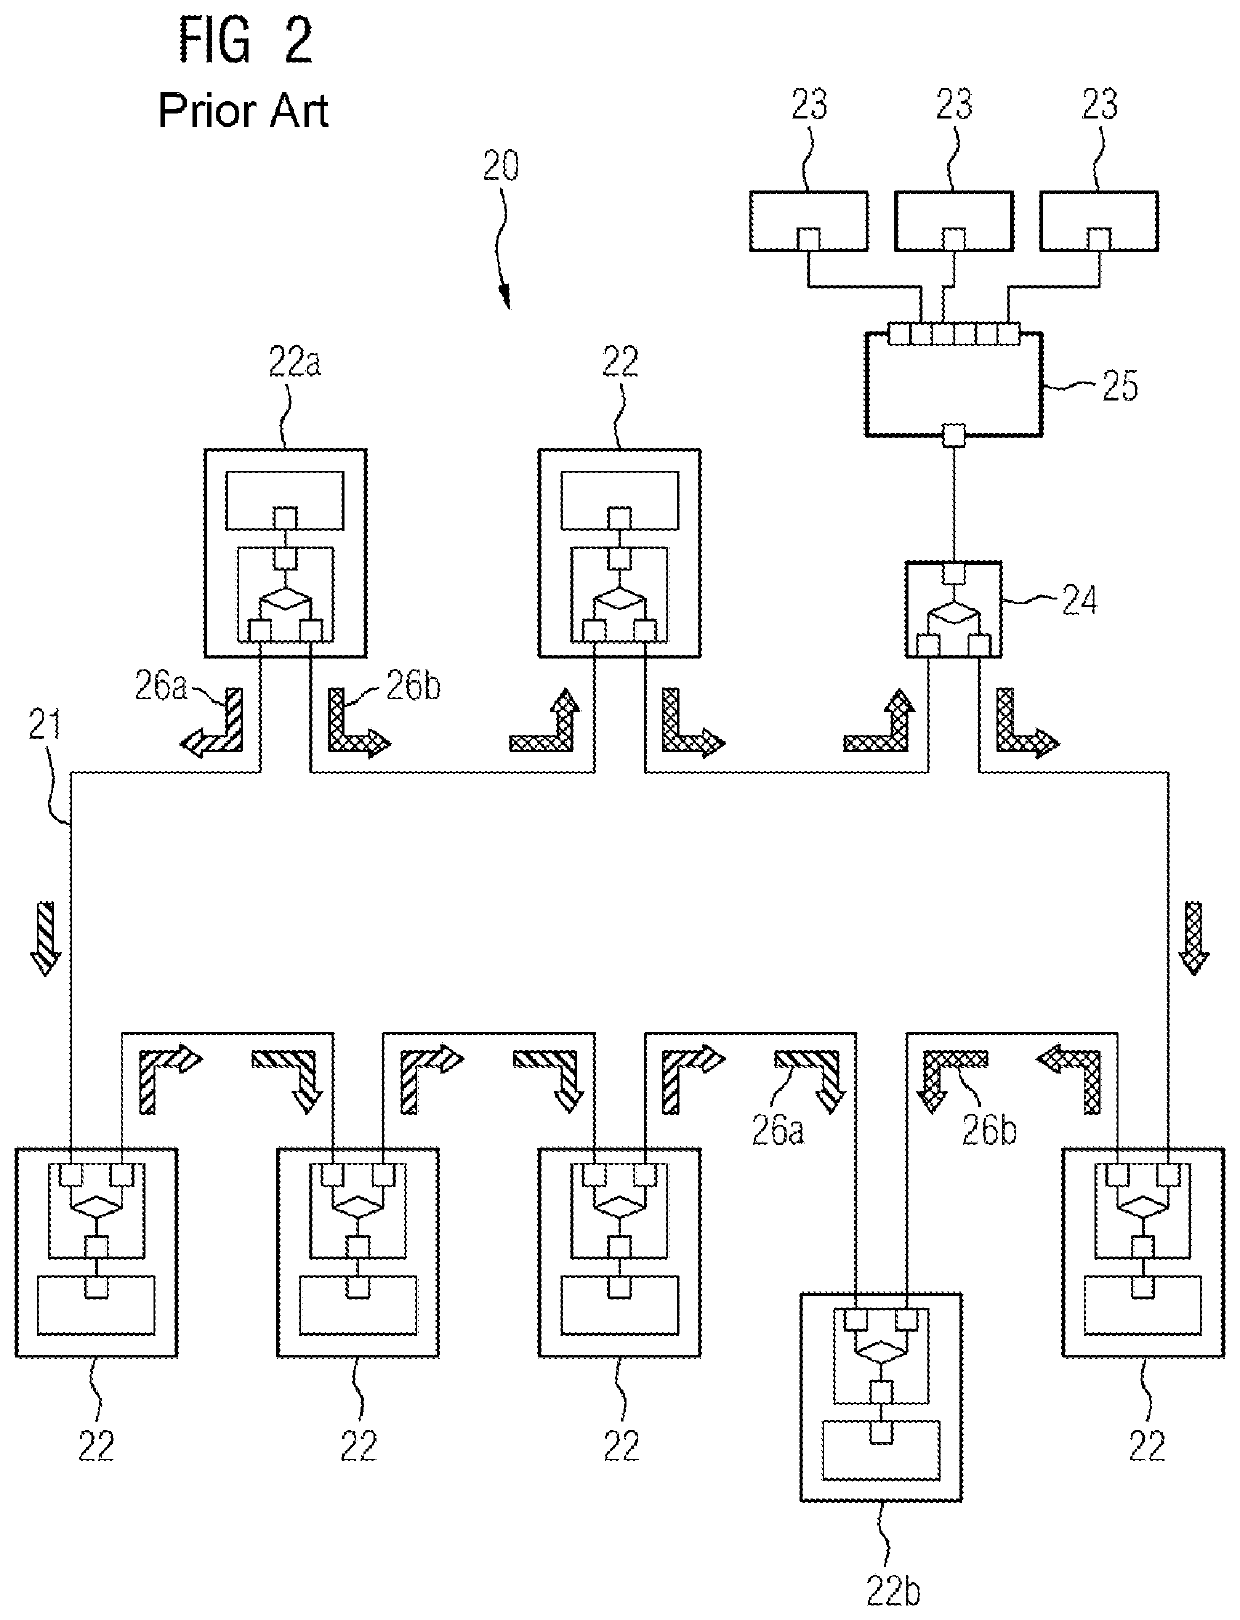 Authenticating a device in a communication network of an automation installation